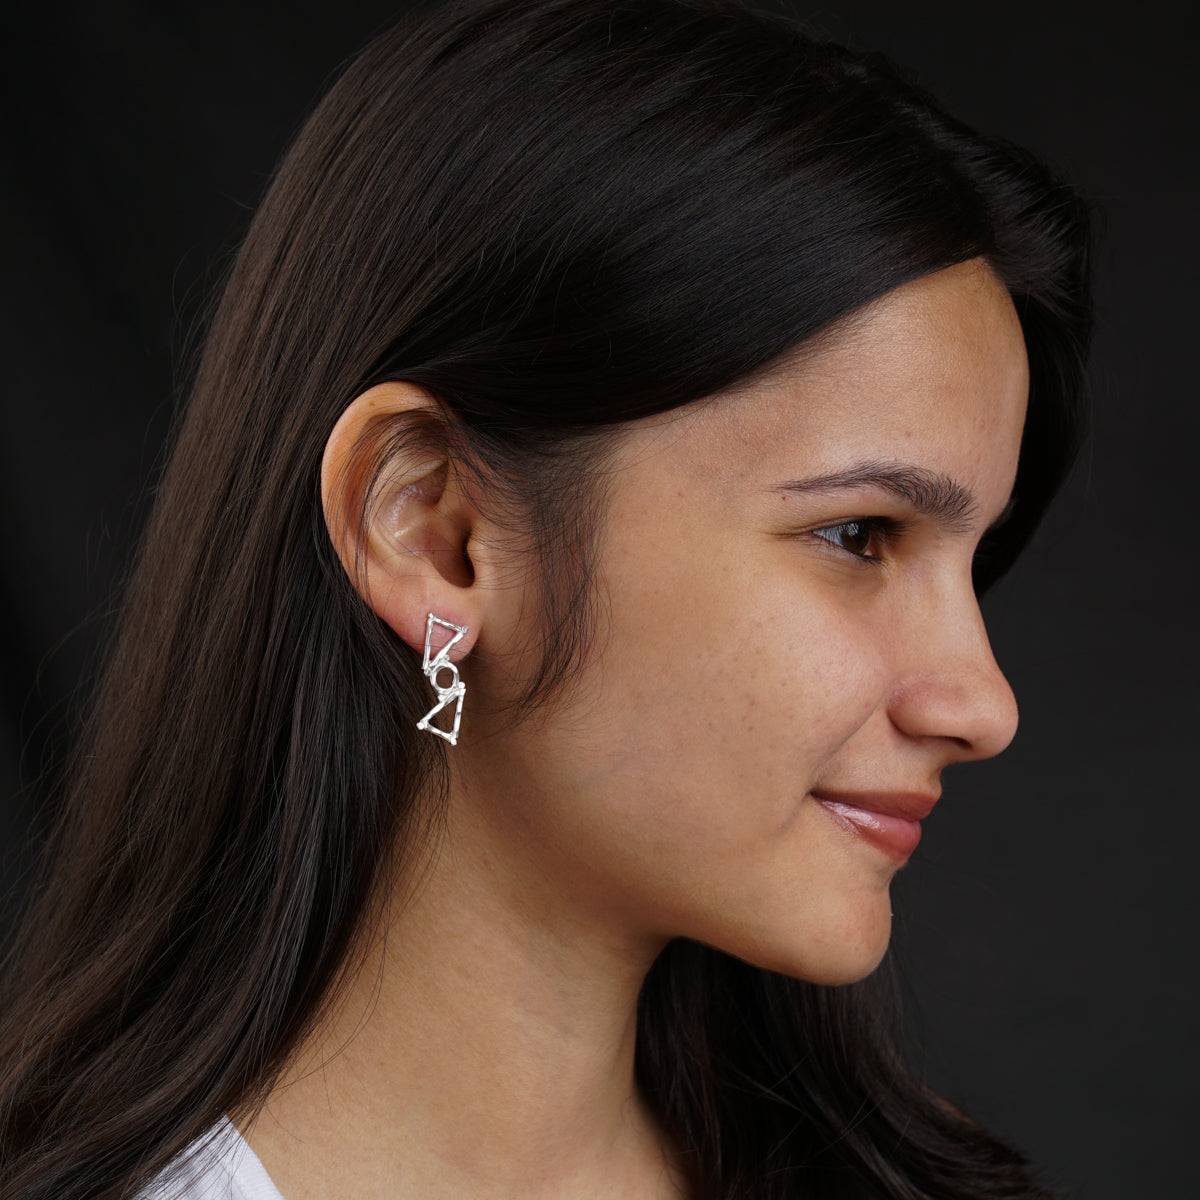 a woman wearing a pair of silver earrings